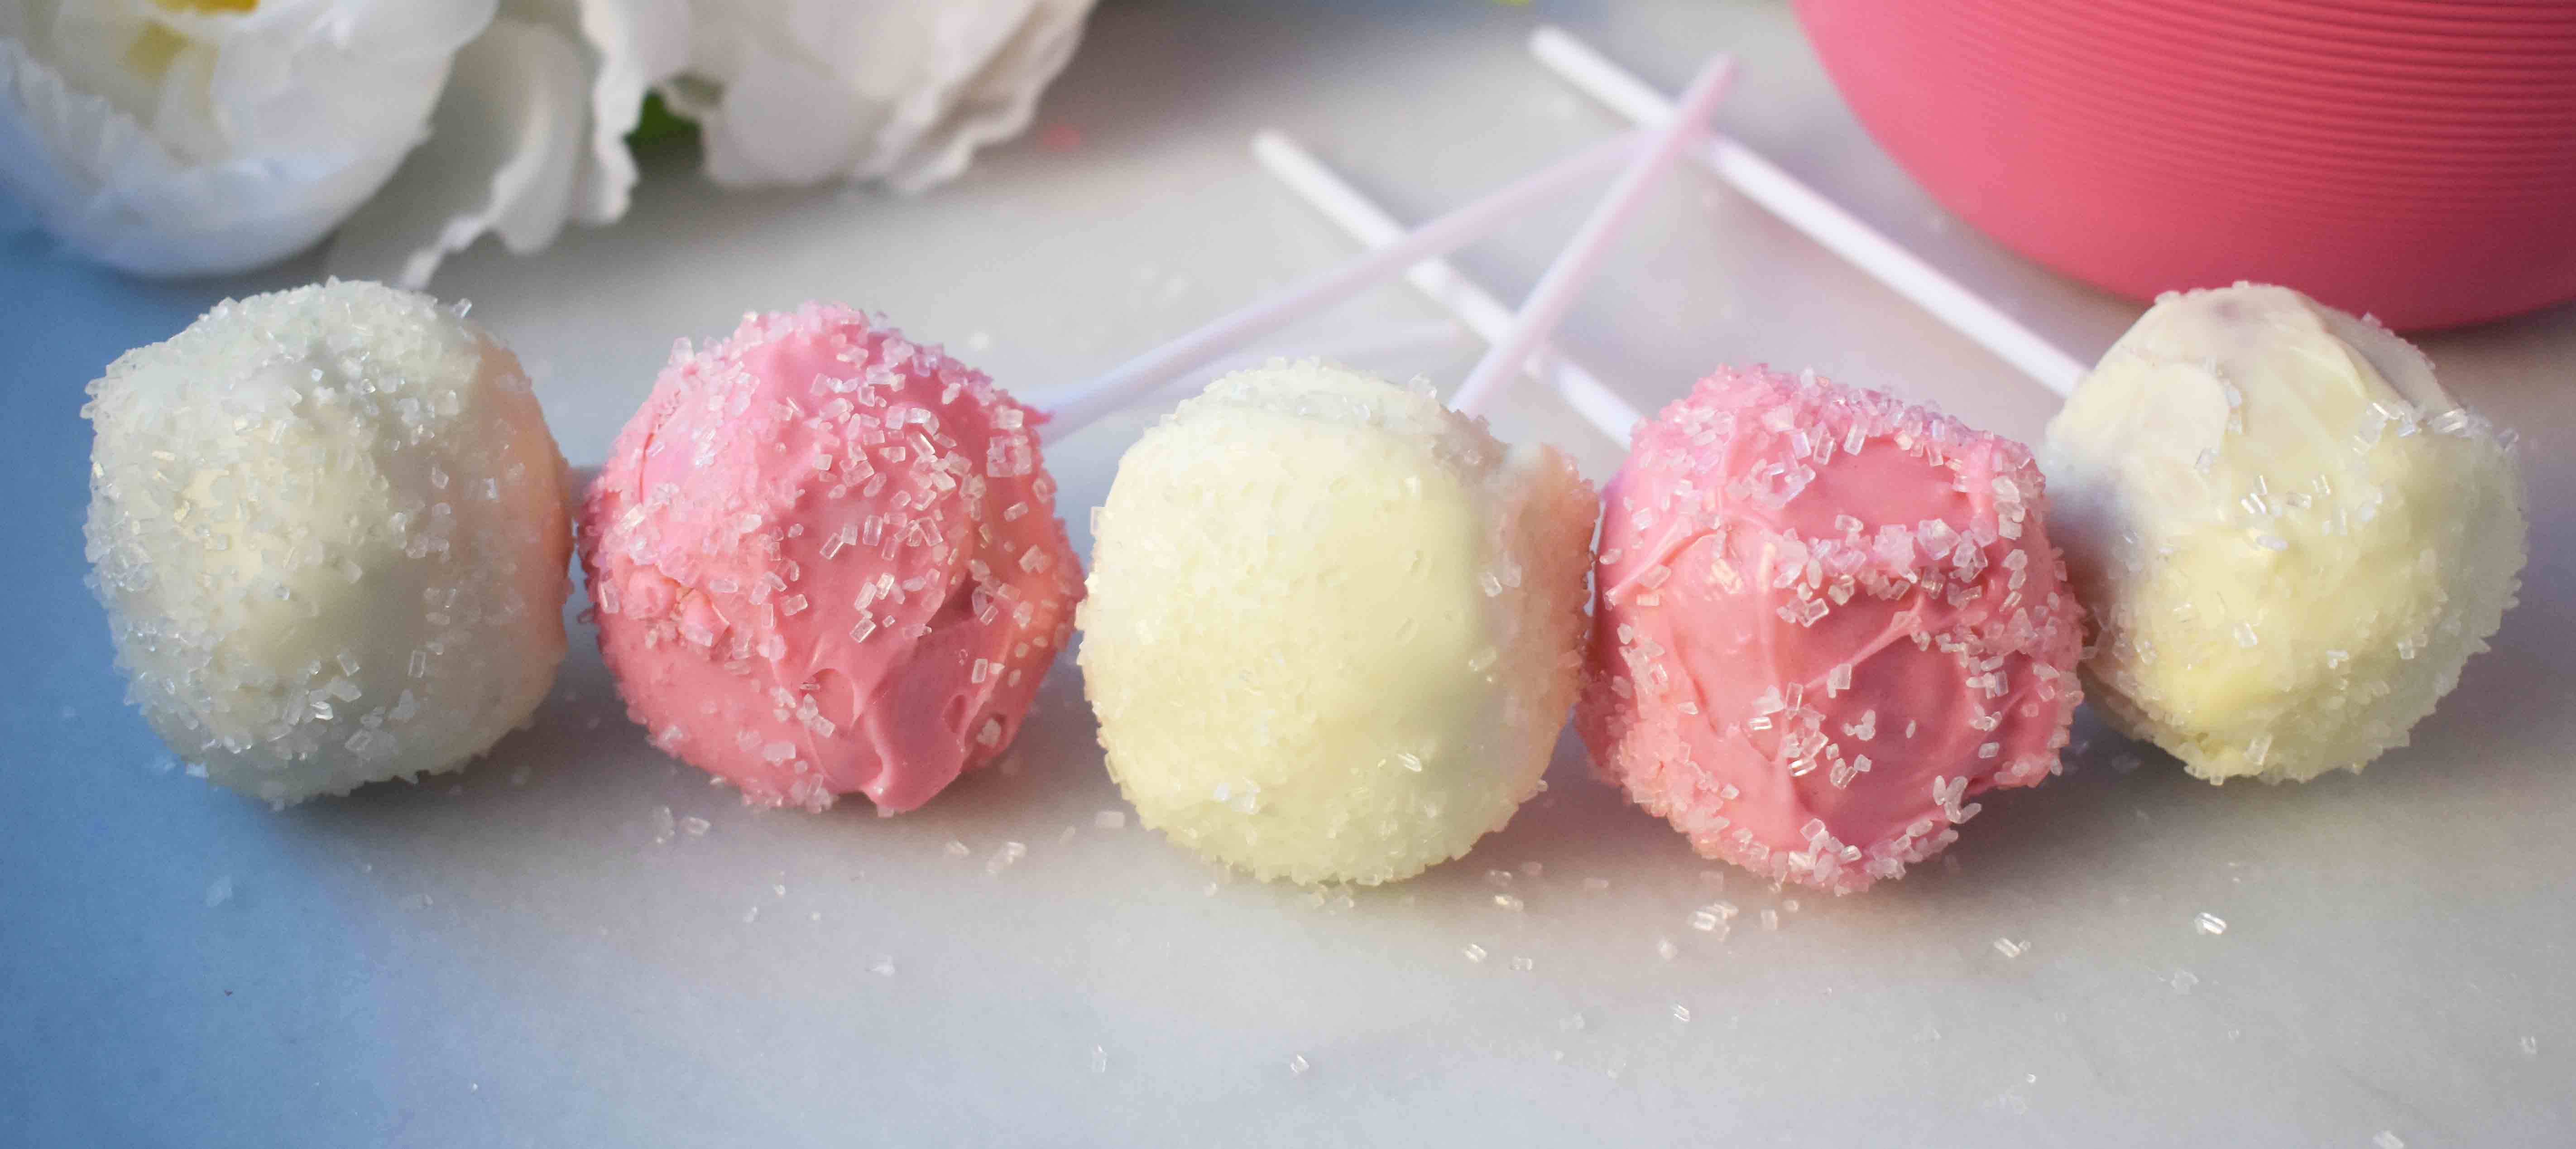 Strawberry Cheesecake Truffle Balls Cake Pops. Homemade yellow butter cake mixed with fresh strawberry cream cheese frosting. Then rolled in melted white melting wafers and sprinkled with sparkling sugar. www.modernhoney.com